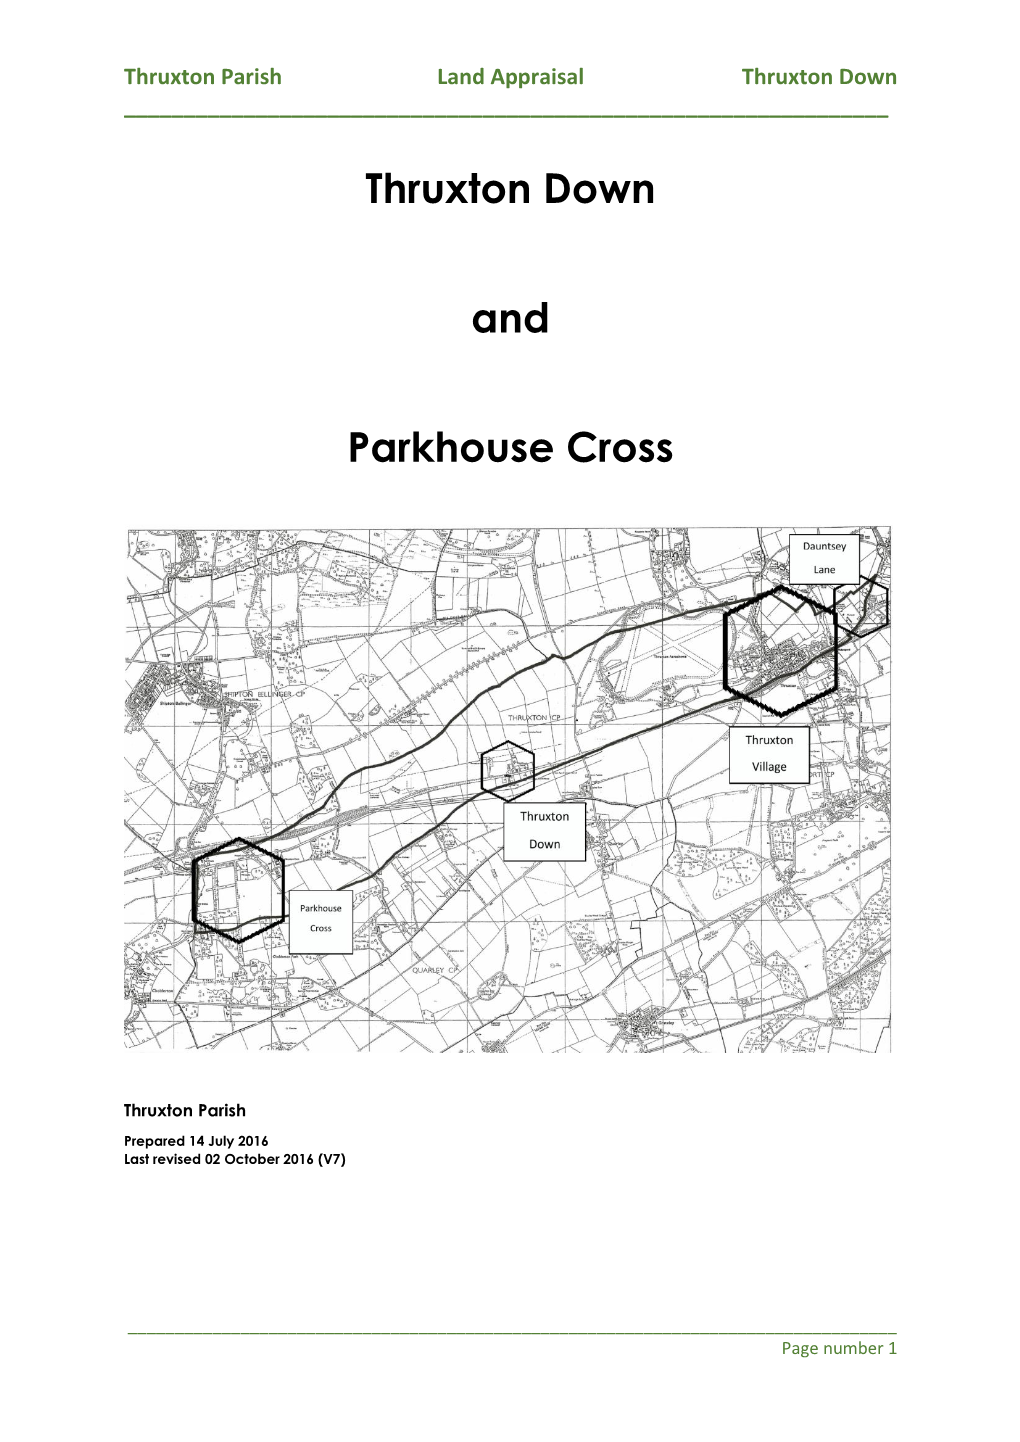 Thruxton Down and Parkhouse Cross That Collectively Comprise 50% Or More of the Thruxton Parish Land Area